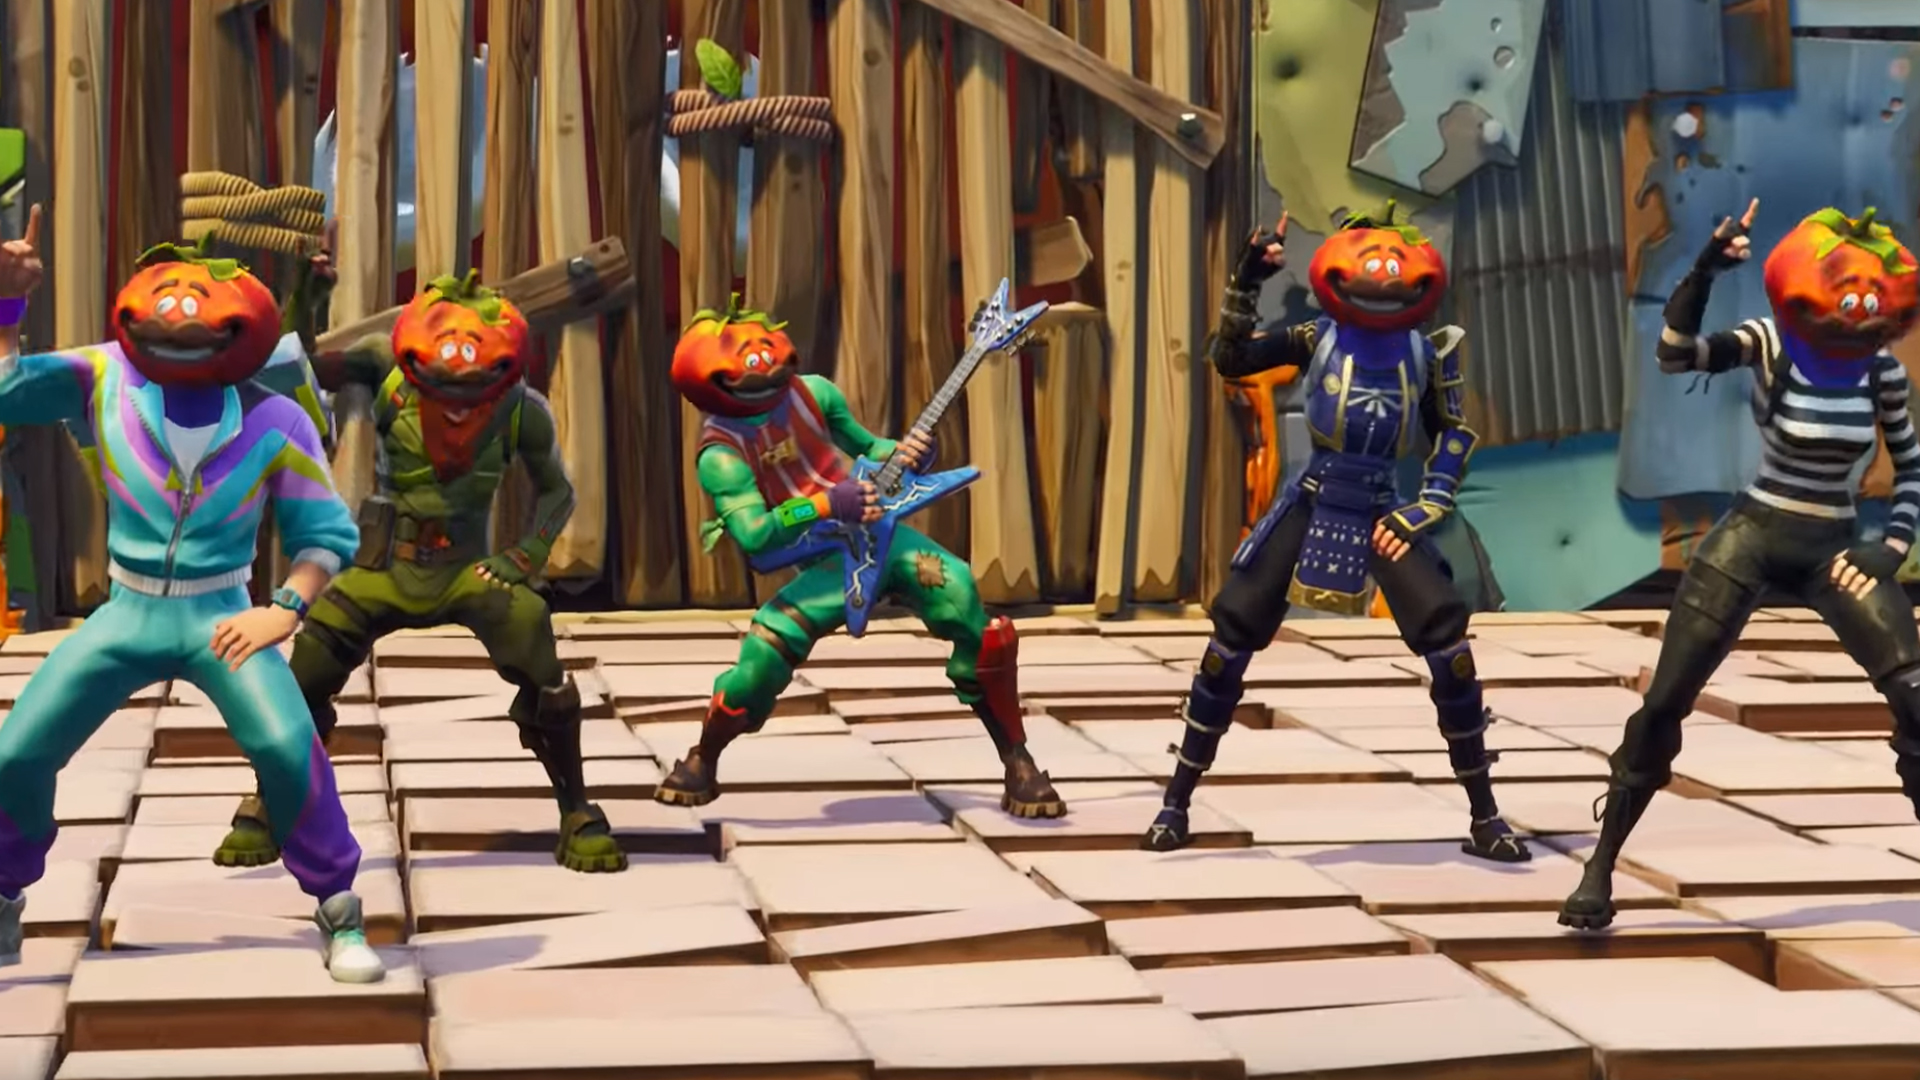 Fortnite Food Fight 1920 1080 Fortnite Goes 12v12 With Infinite Respawns In The Food Fight Ltm Pcgamesn